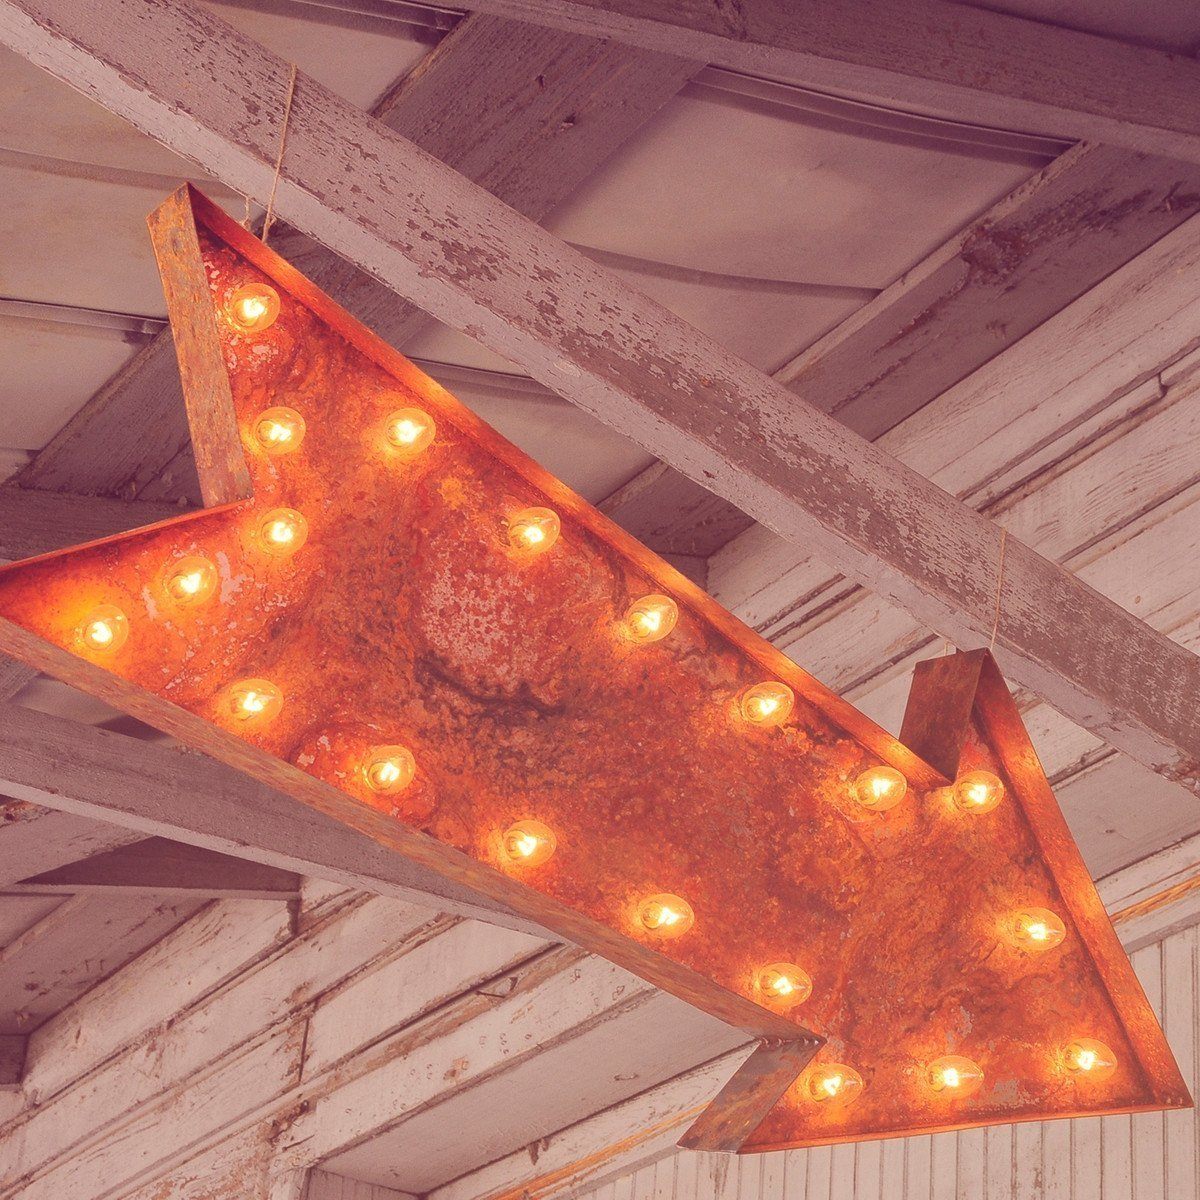 (Rustic) Marquee Marquee Rusty Large Lights The Vintage Lights 36” with Sign Online - Marquee Arrow - Buy